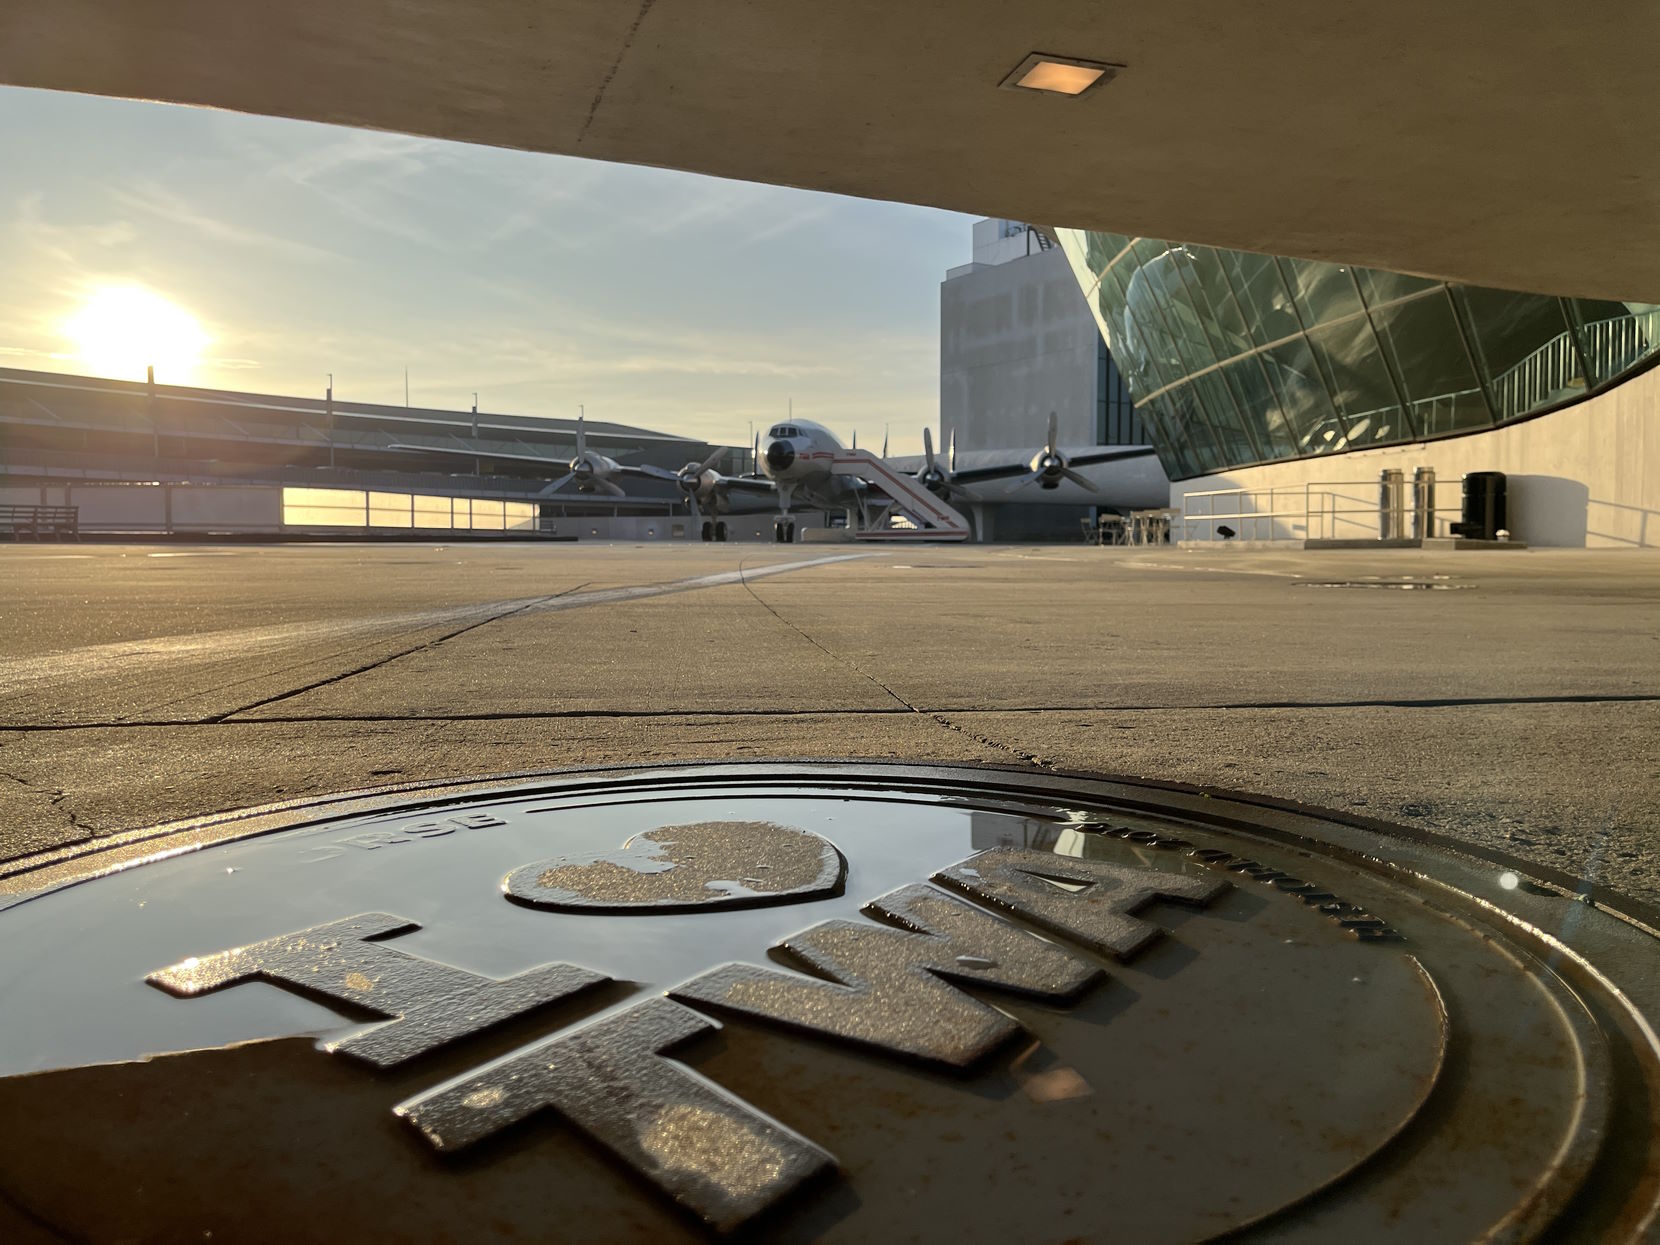 Photo with an 'I heart TWA' manhole in the foreground, and a Lockheed Constellation in the background.